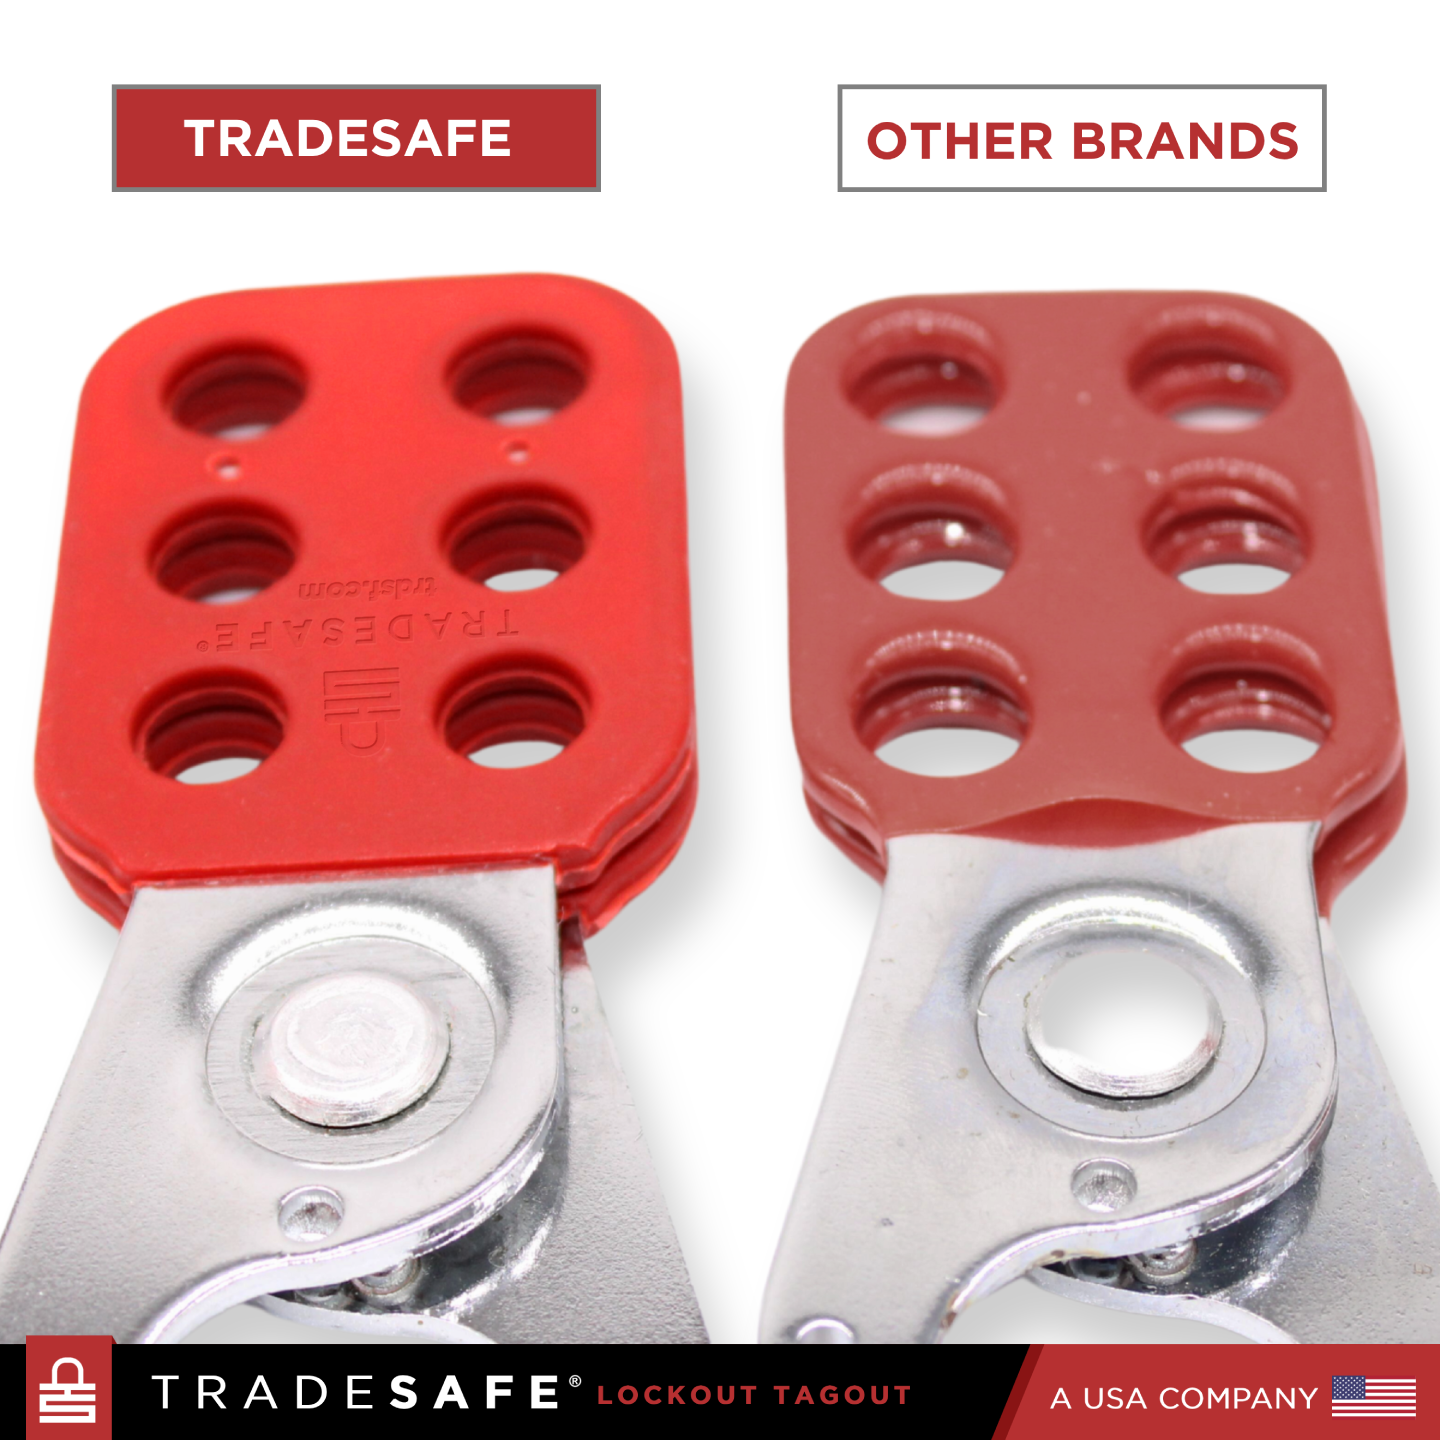 TRADESAFE LOTO Hasp vs other brands